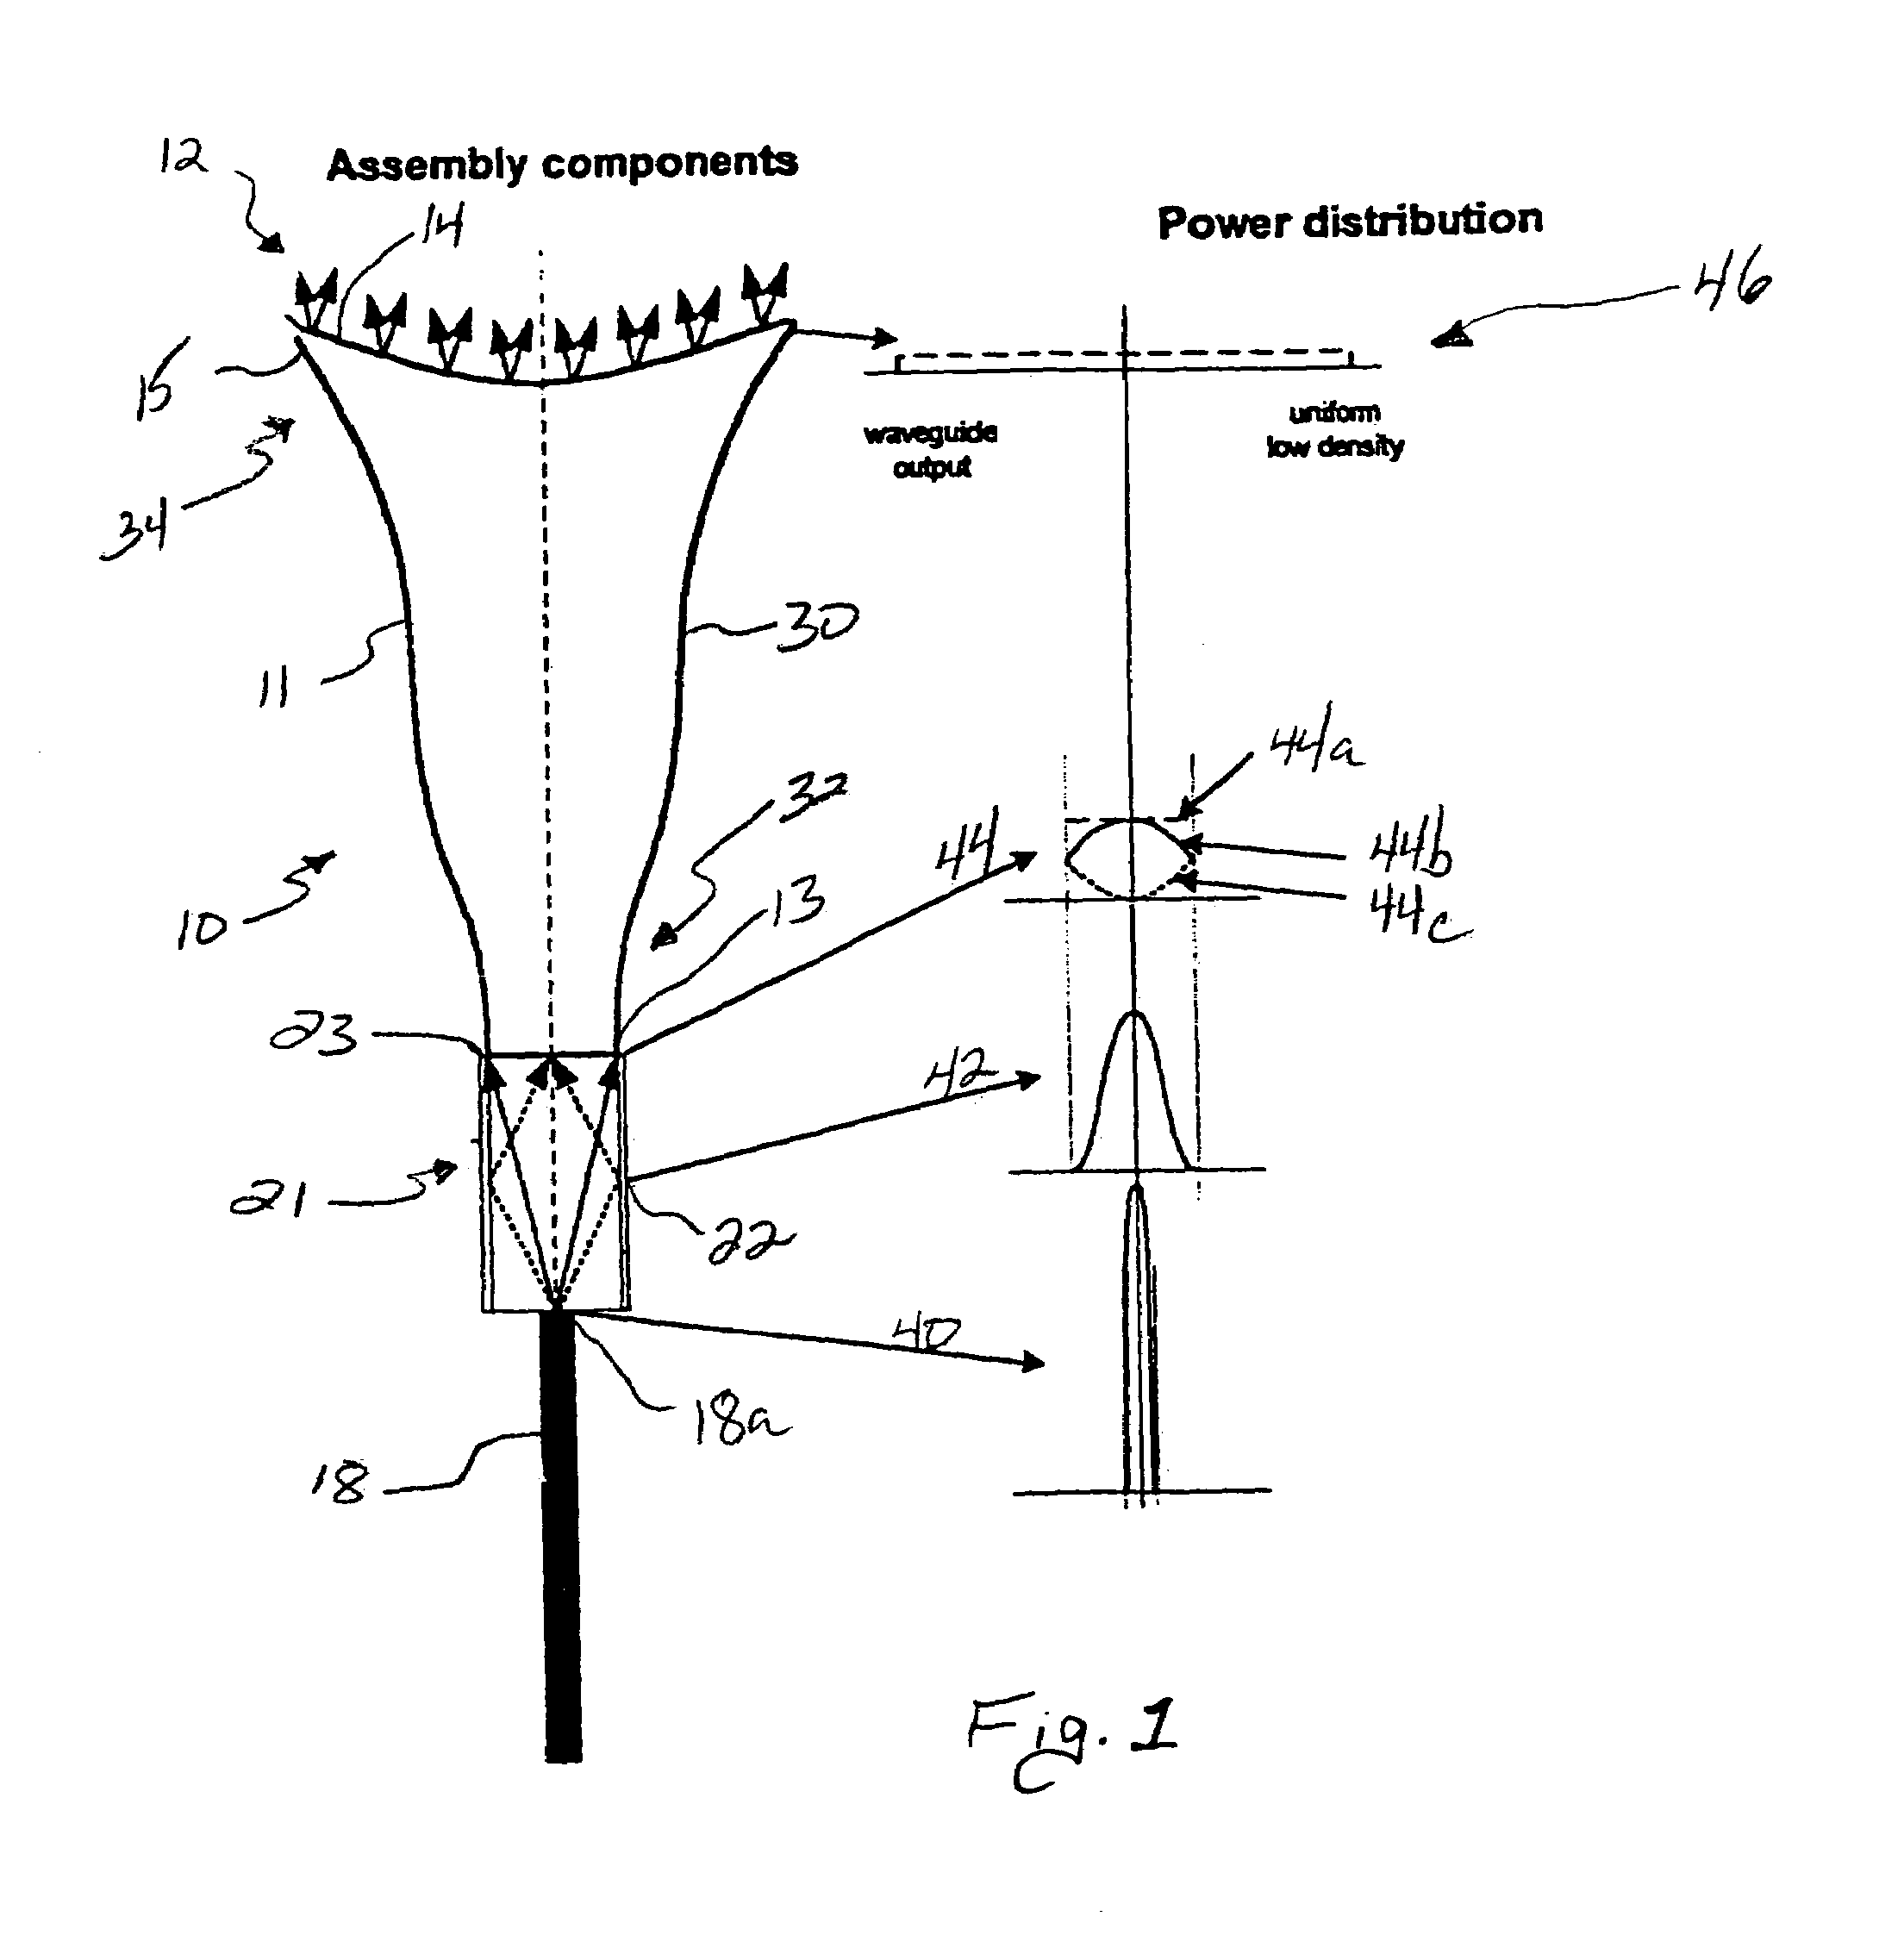 Tapered fused waveguide for delivering treatment electromagnetic radiation toward a target surfaced